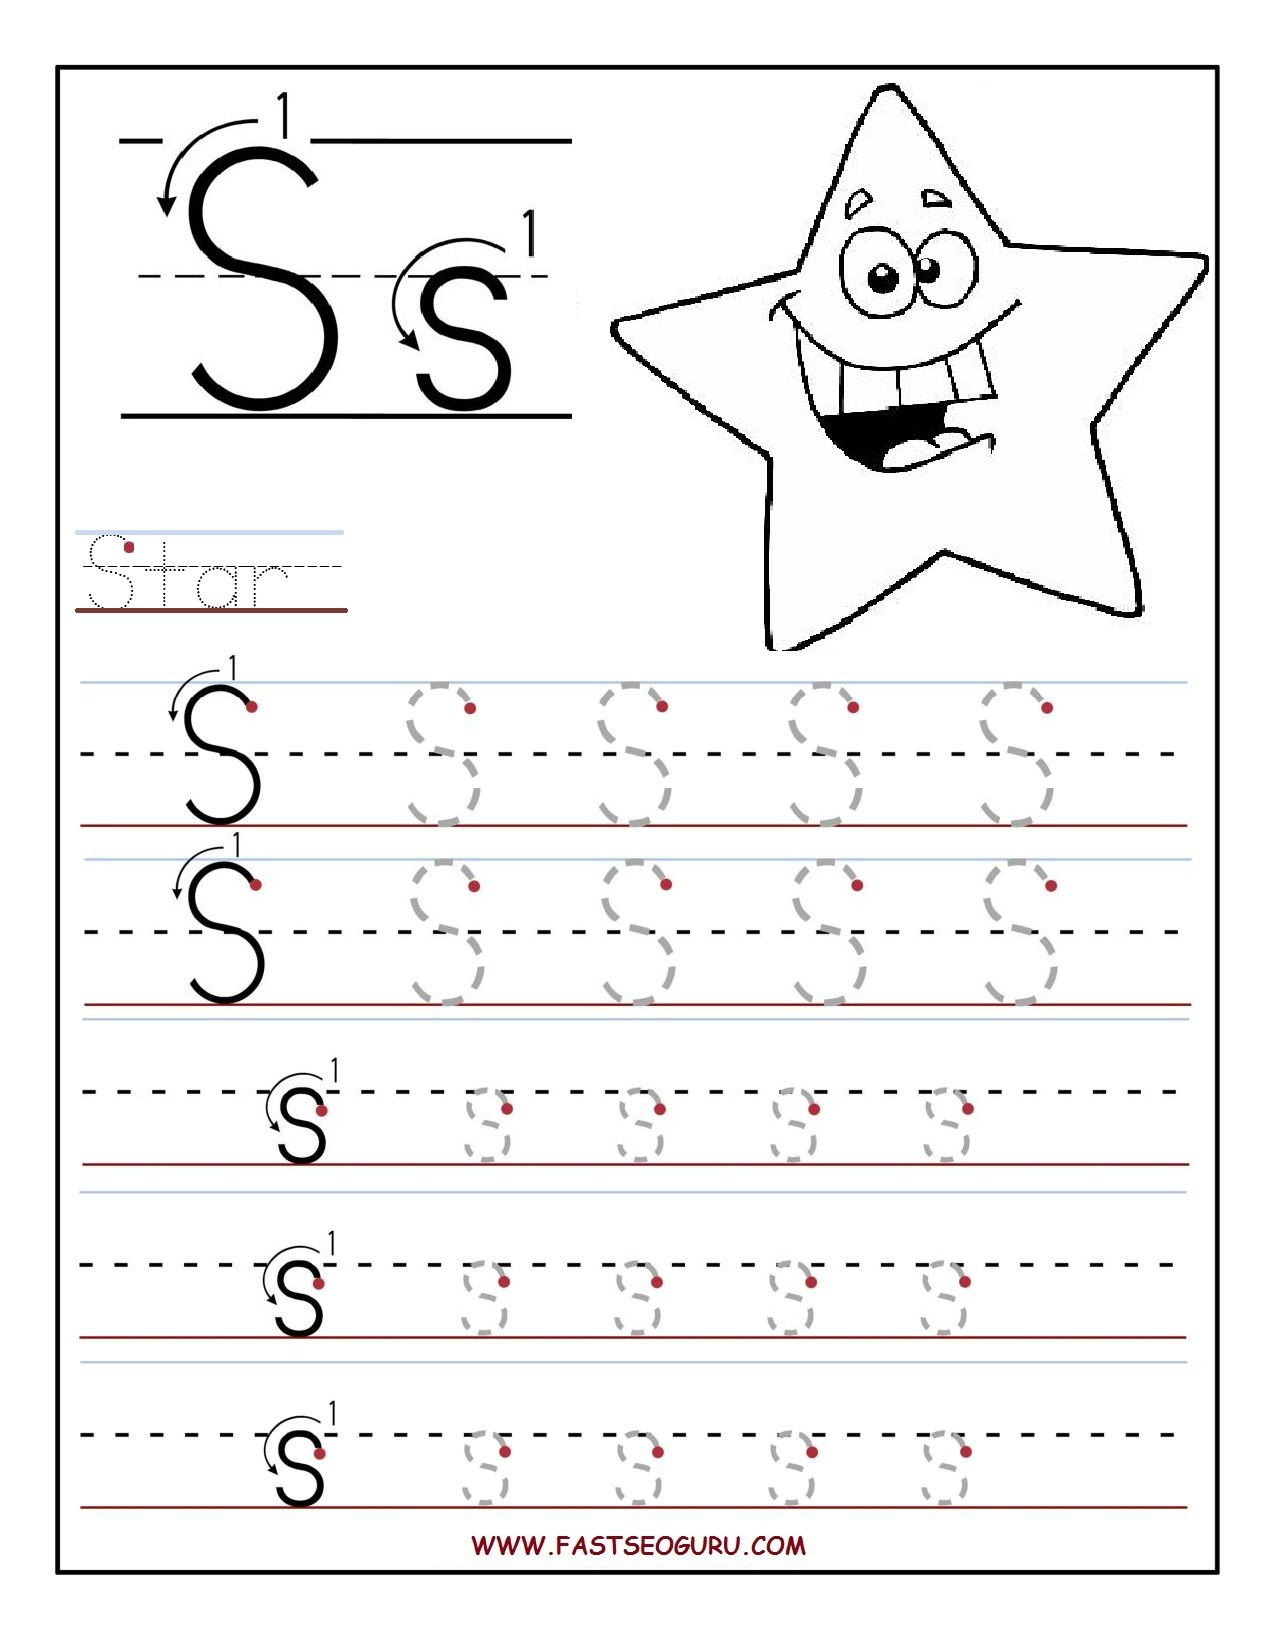 Printable Letter S Tracing Worksheets For Preschool in Trace The Letter S Worksheets For Preschool